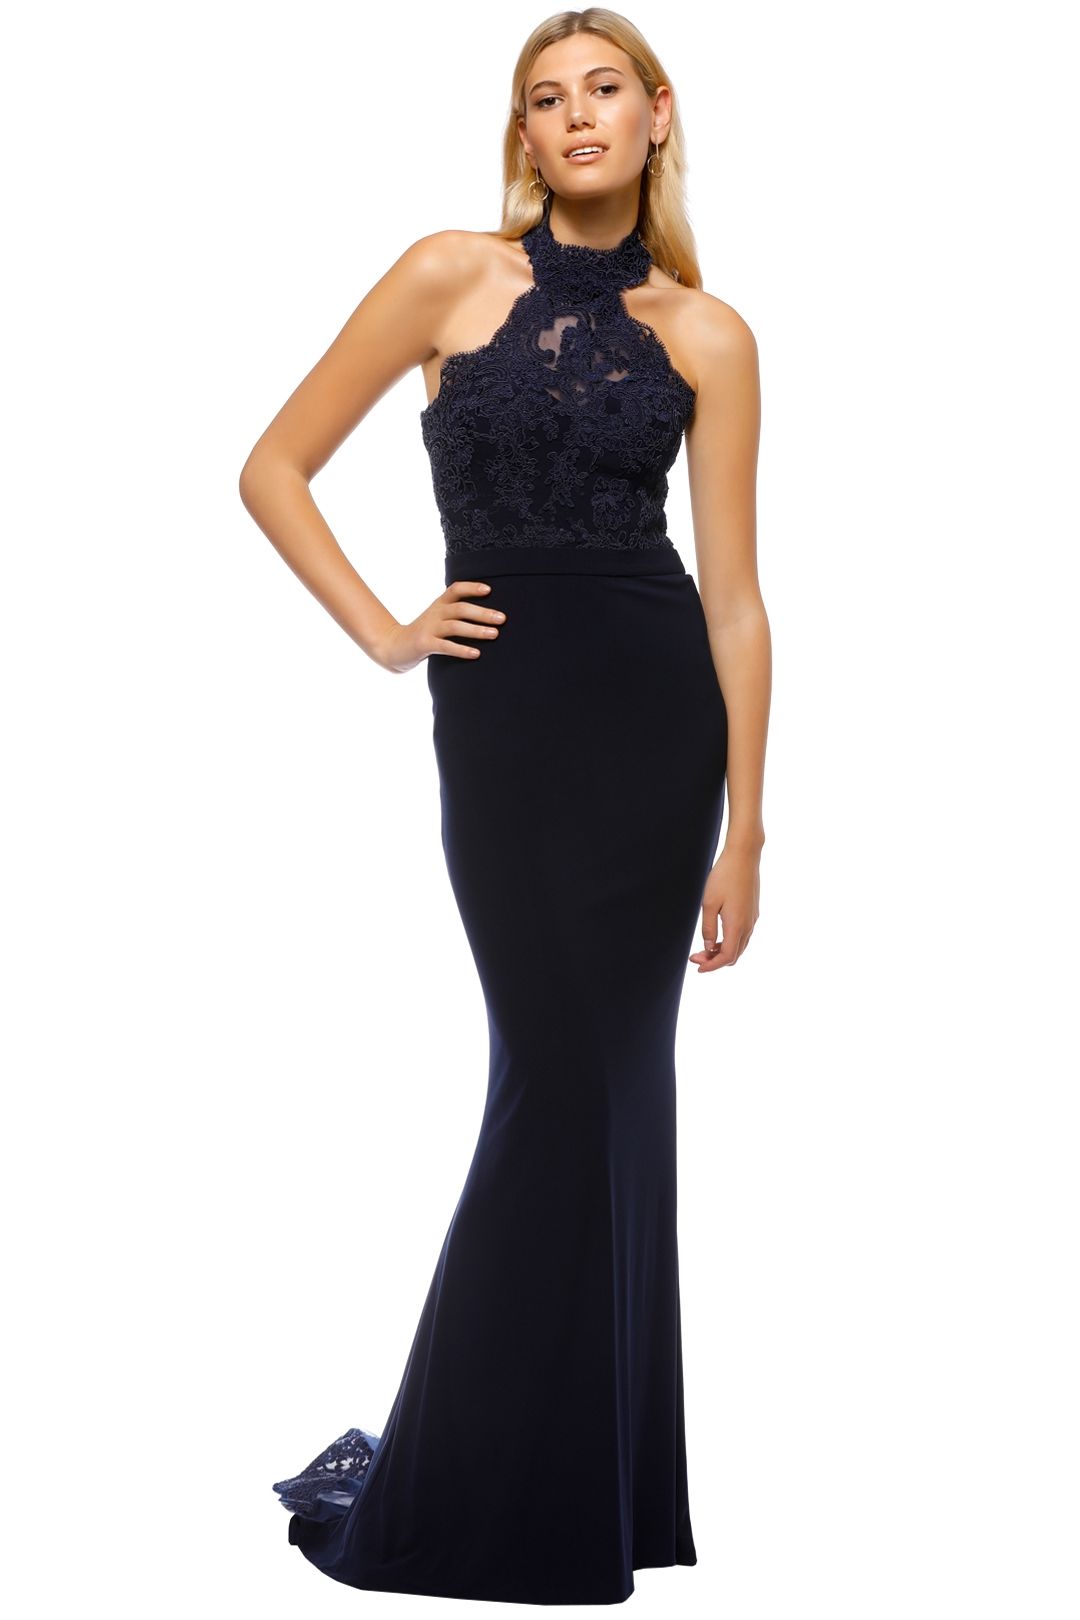 Tinaholy - Lana High Neck Gown - Navy - Front